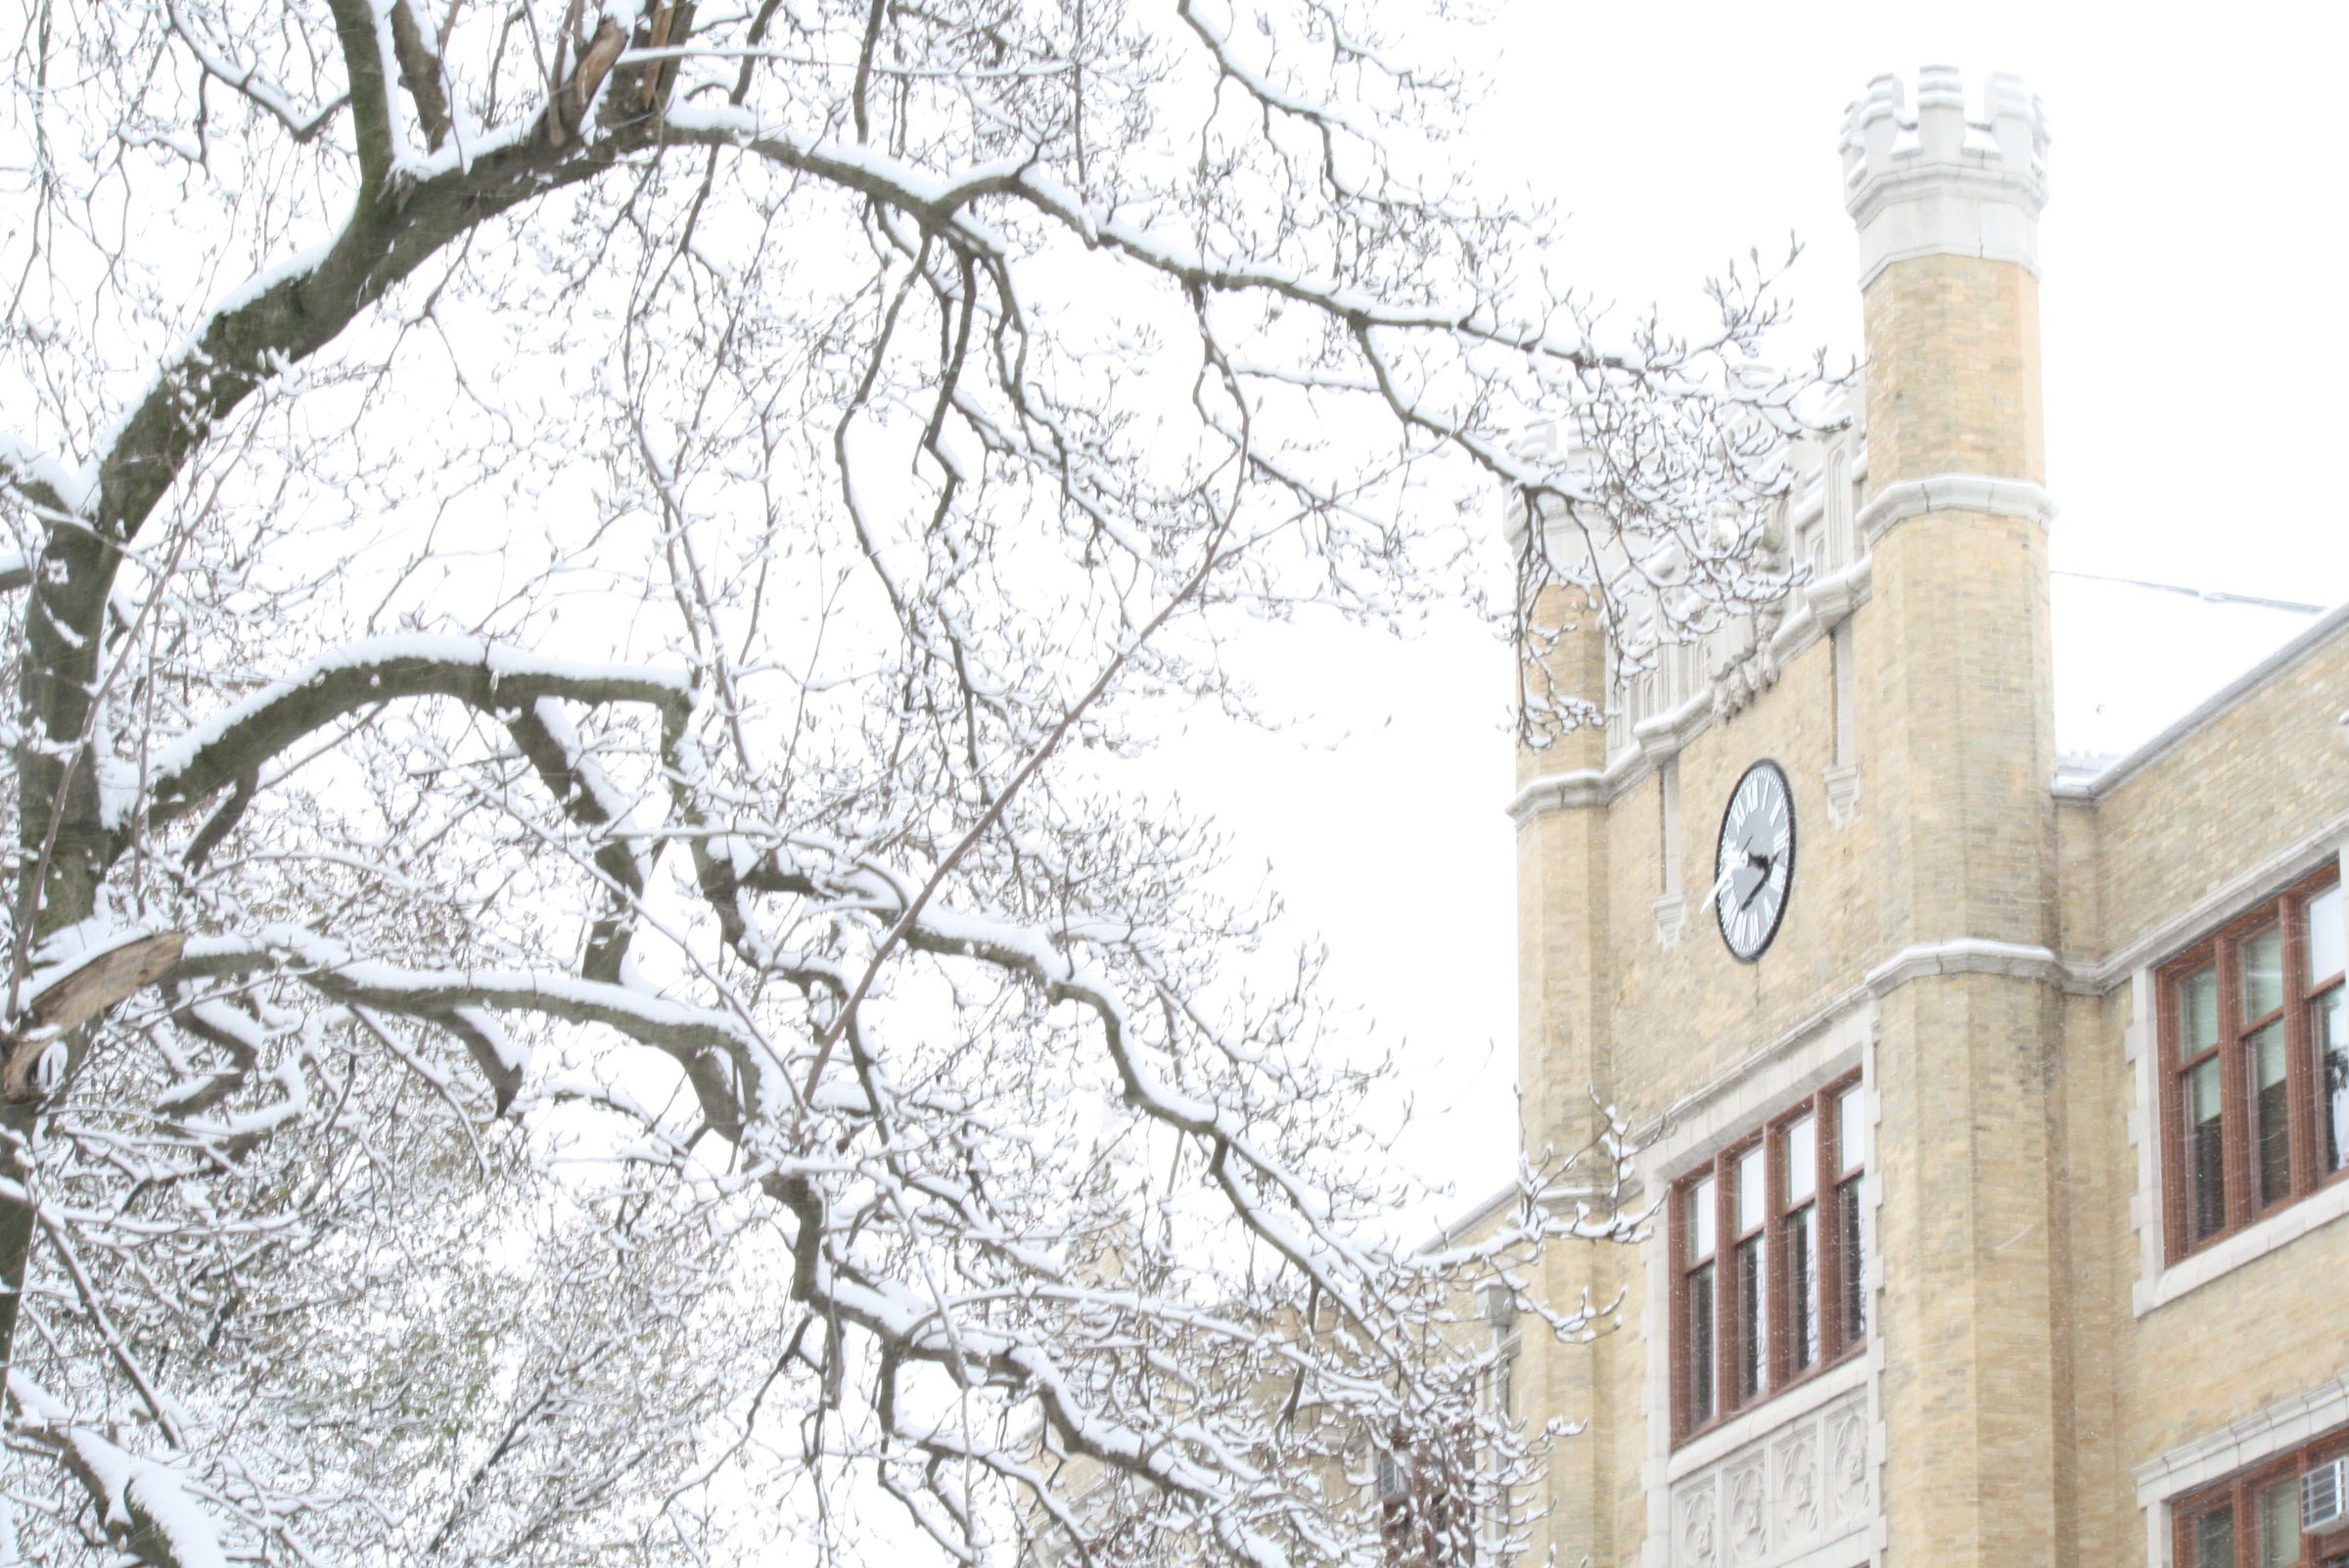 Humanities building in the winter with snow on branches